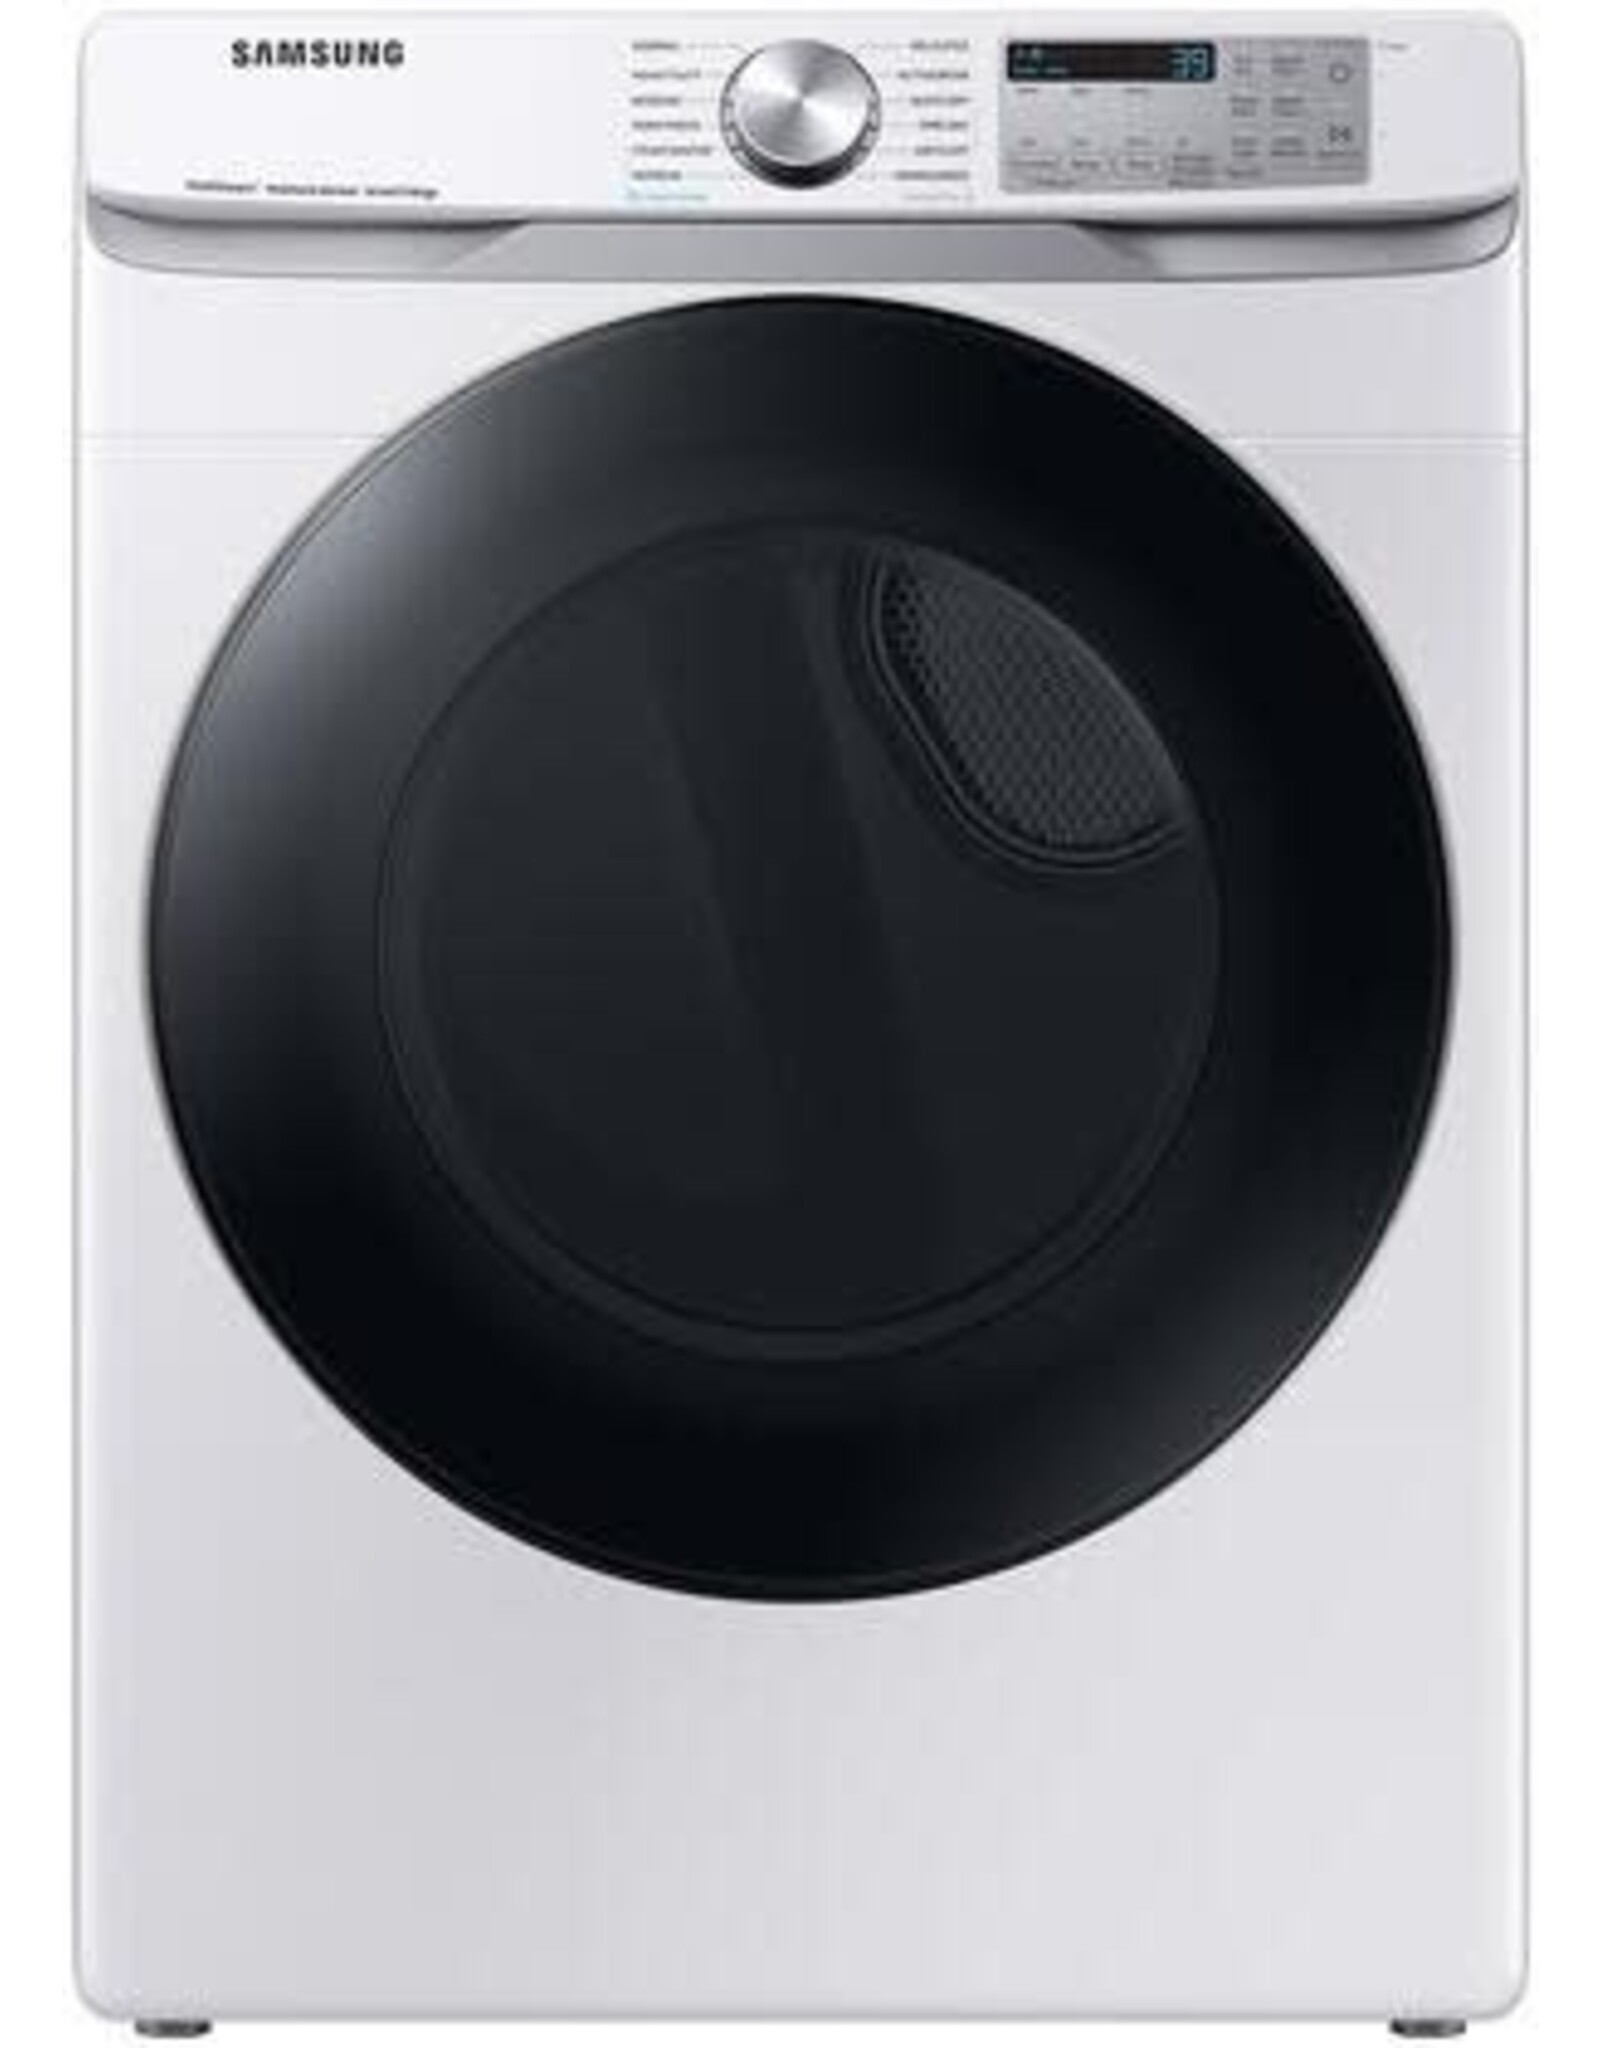 SAMSUNG DVE45B6300W   7.5 cu. ft. Smart Stackable Vented Electric Dryer with Steam Sanitize+ in White